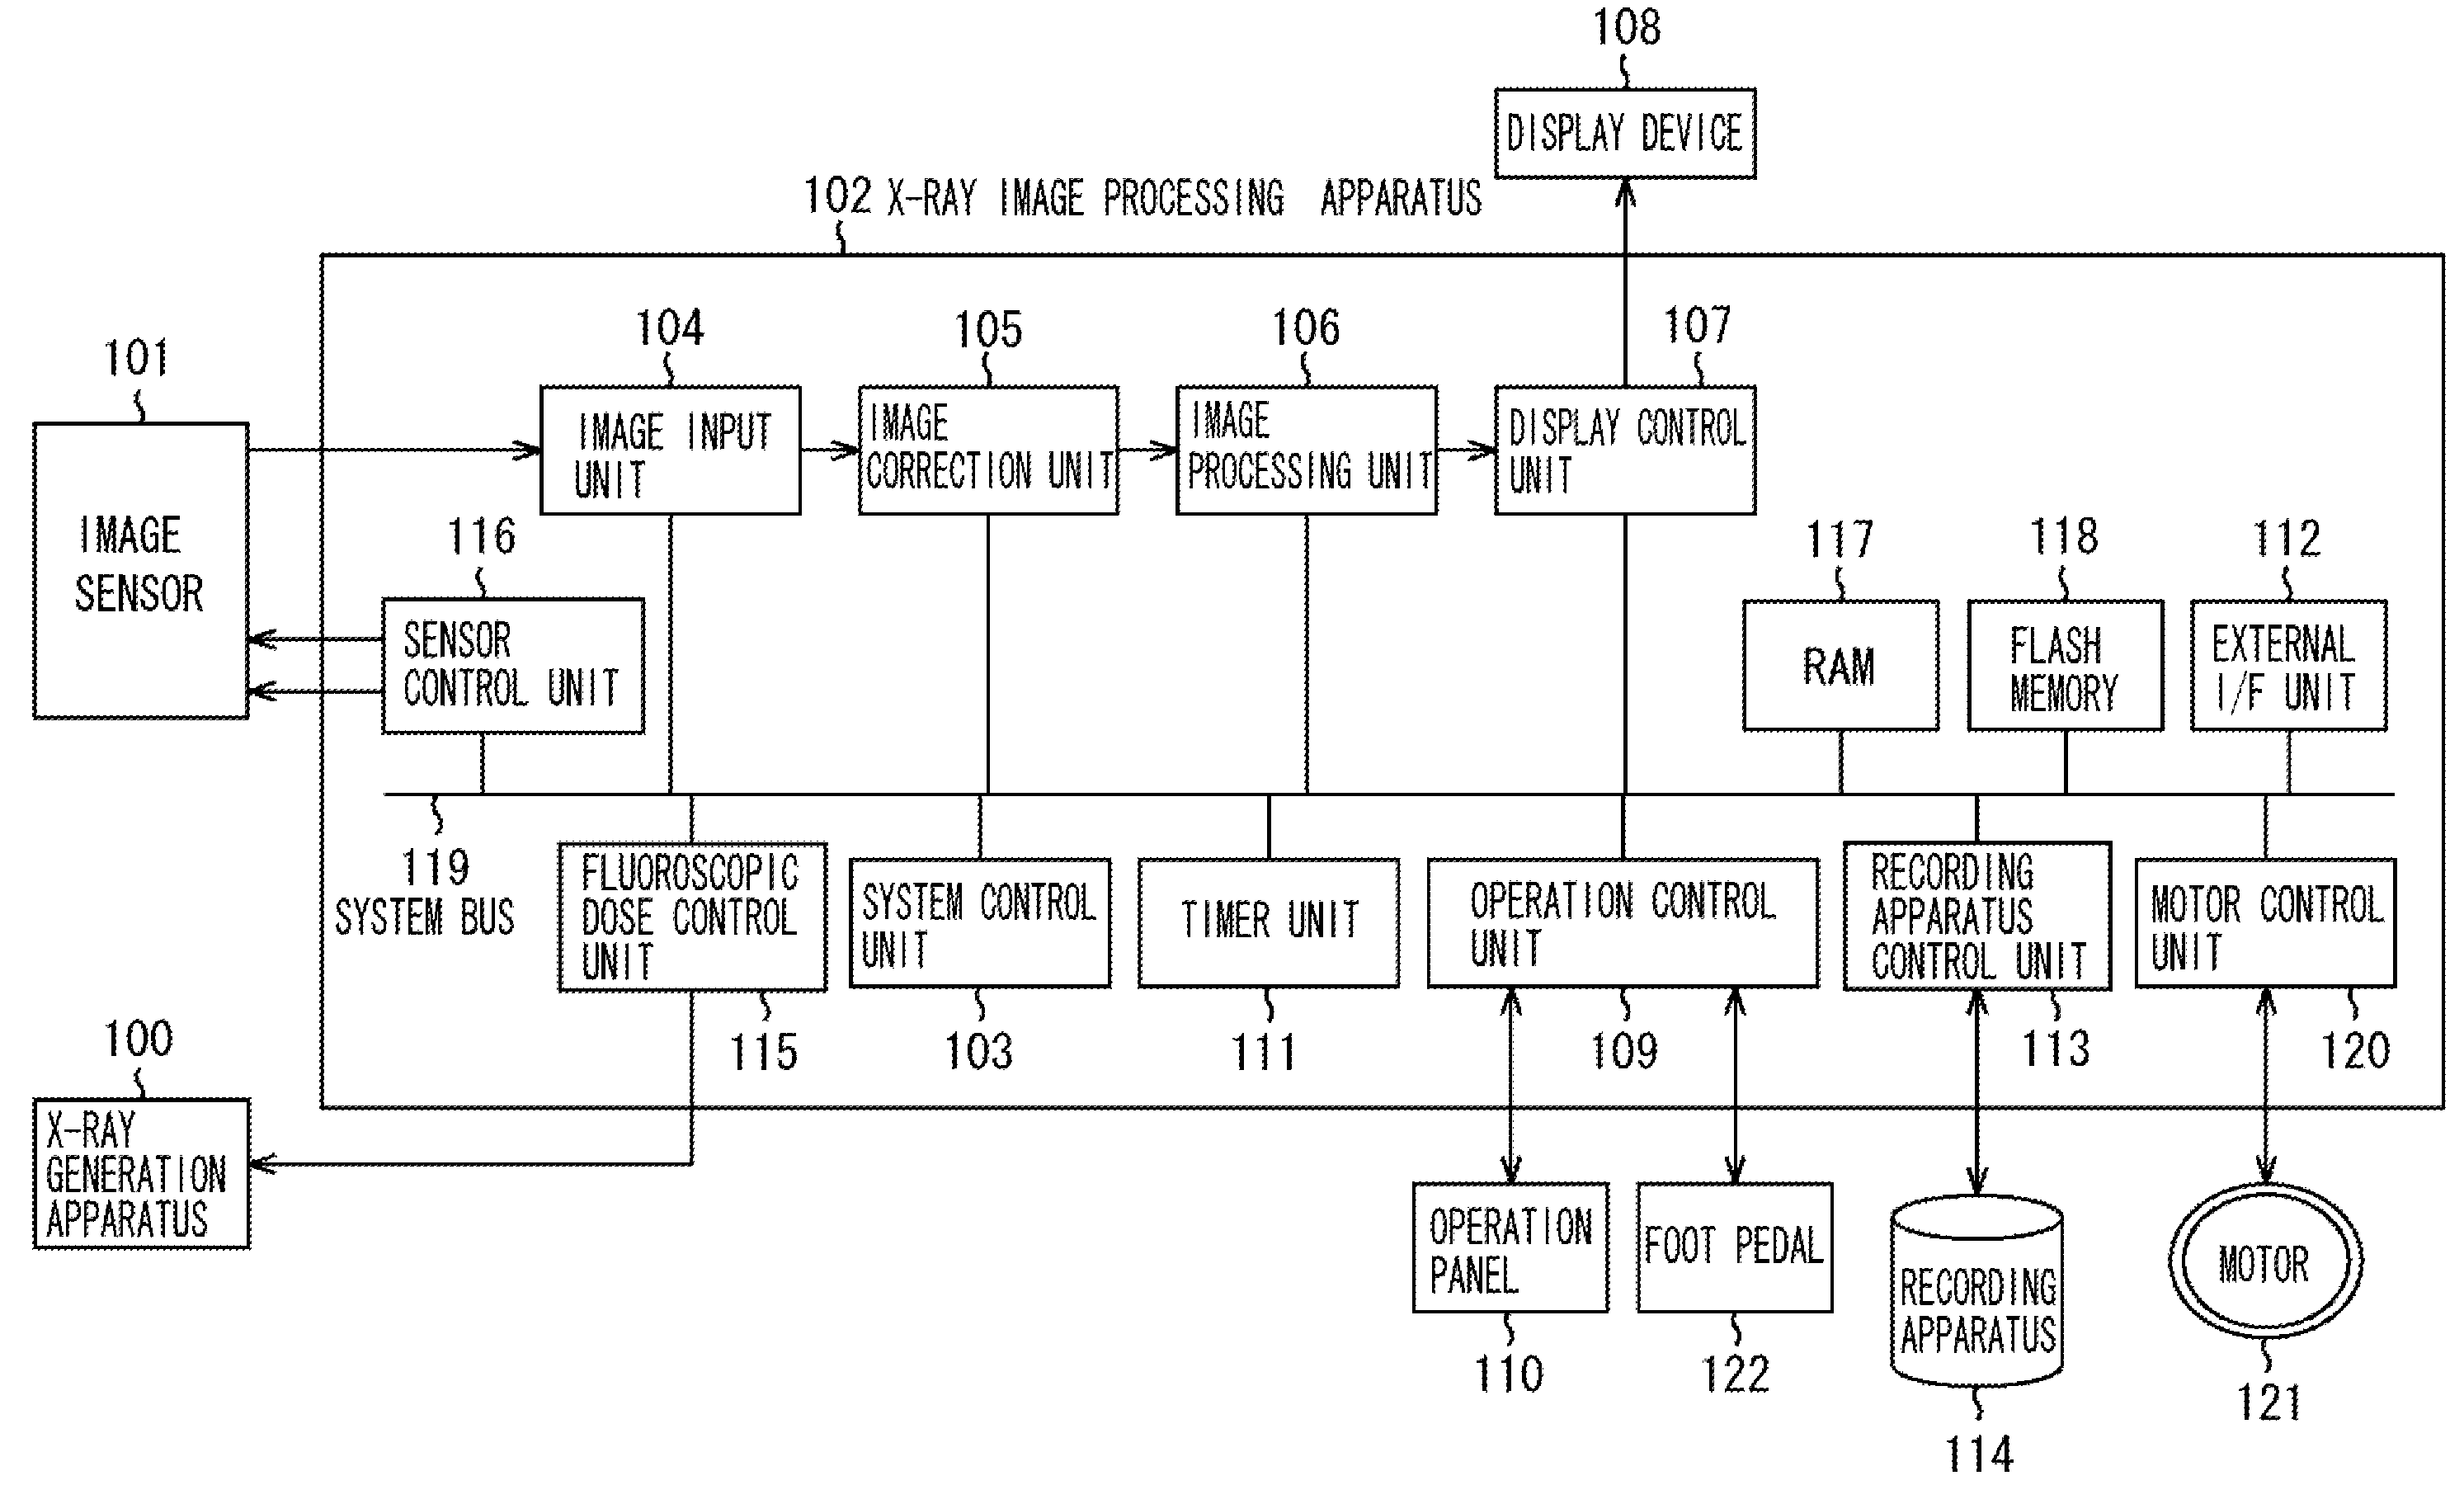 Radiographic imaging control apparatus and method for controlling the same